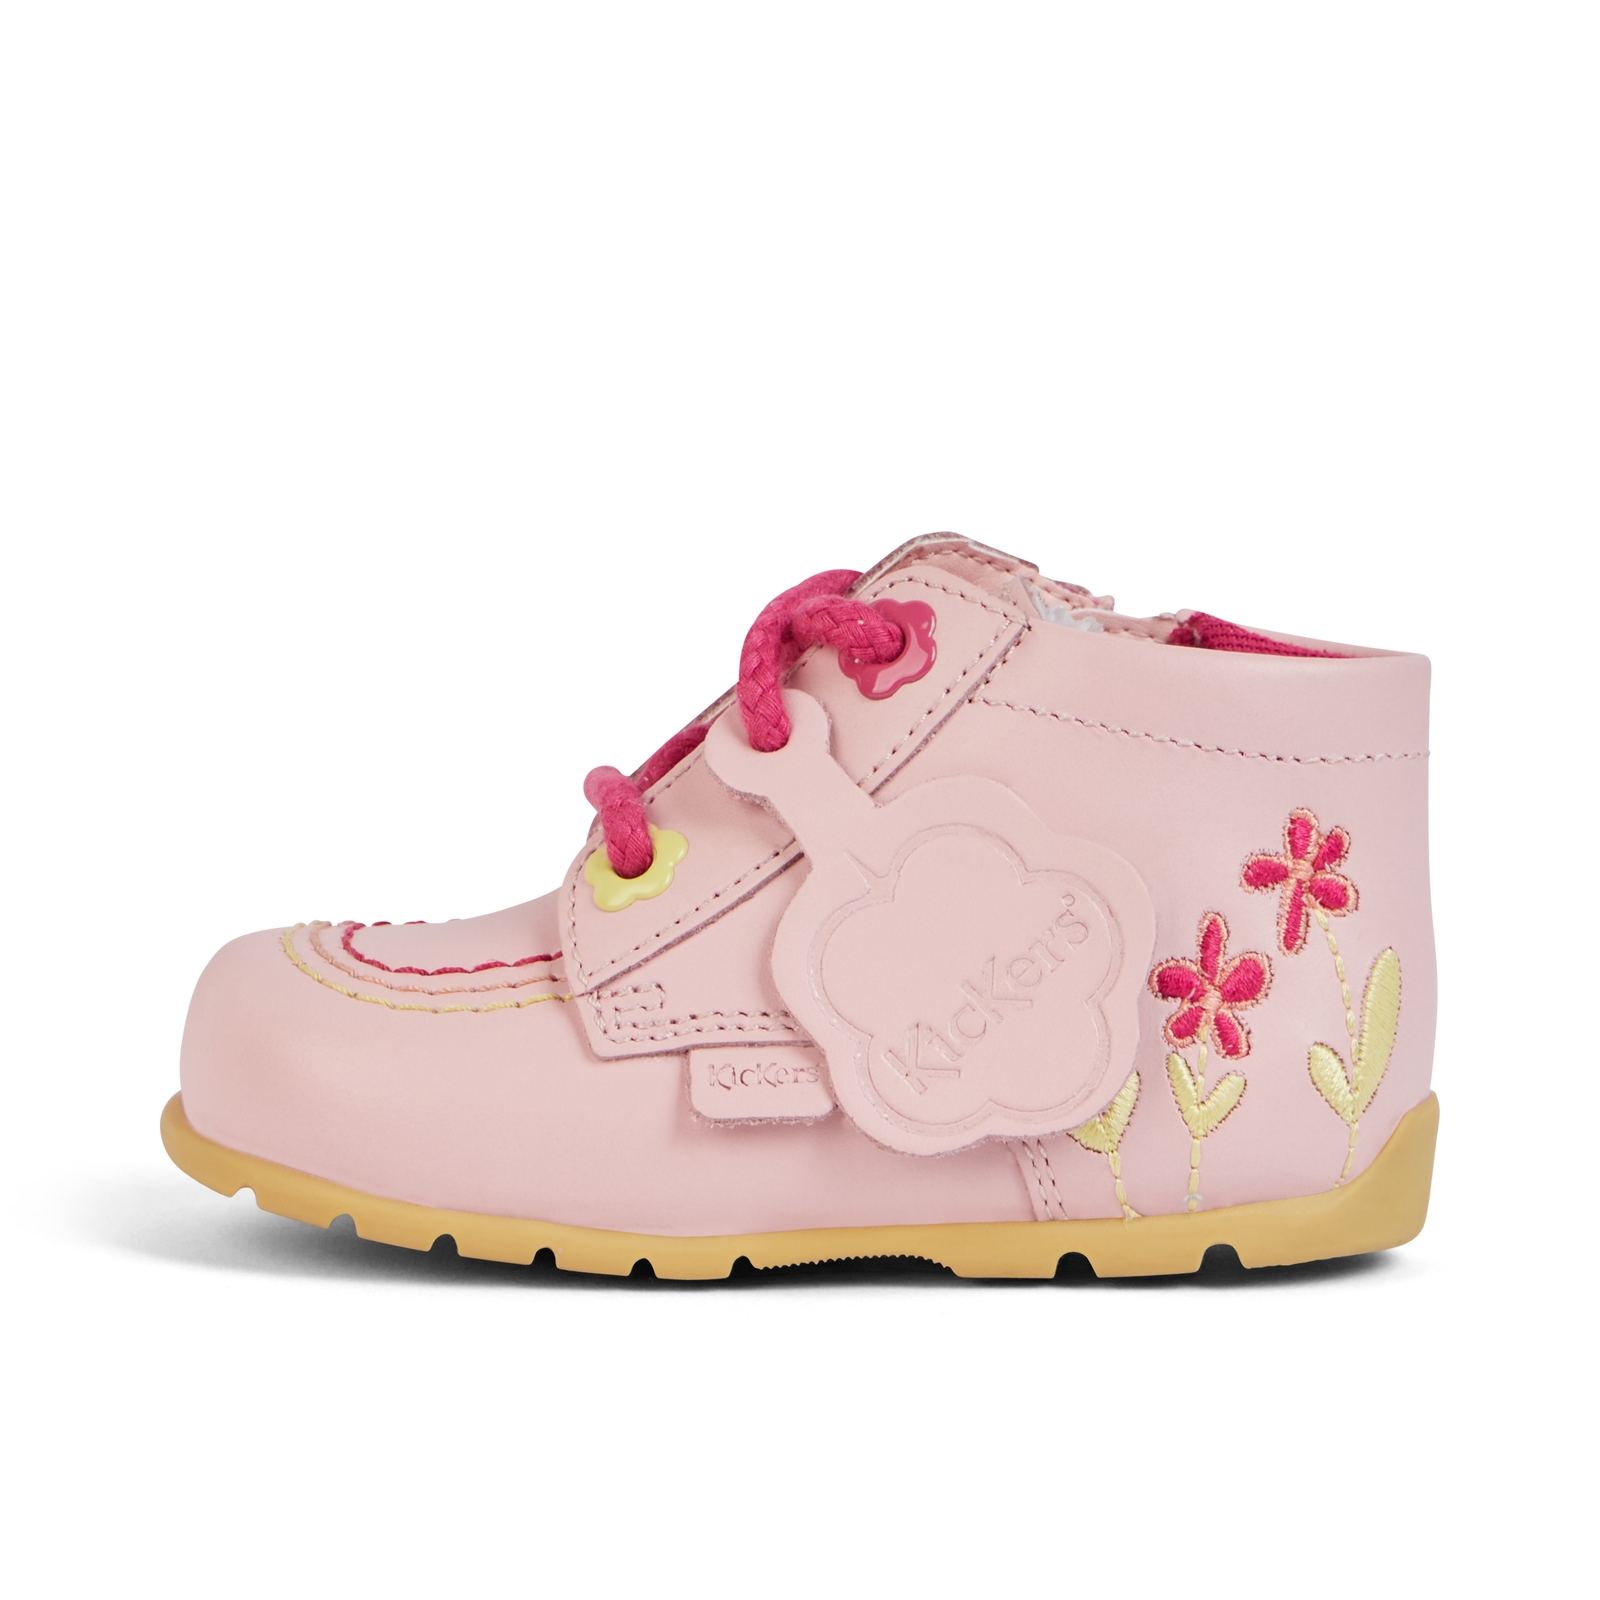 Babies Kick Hi Baby Flower Boots Leather Pink